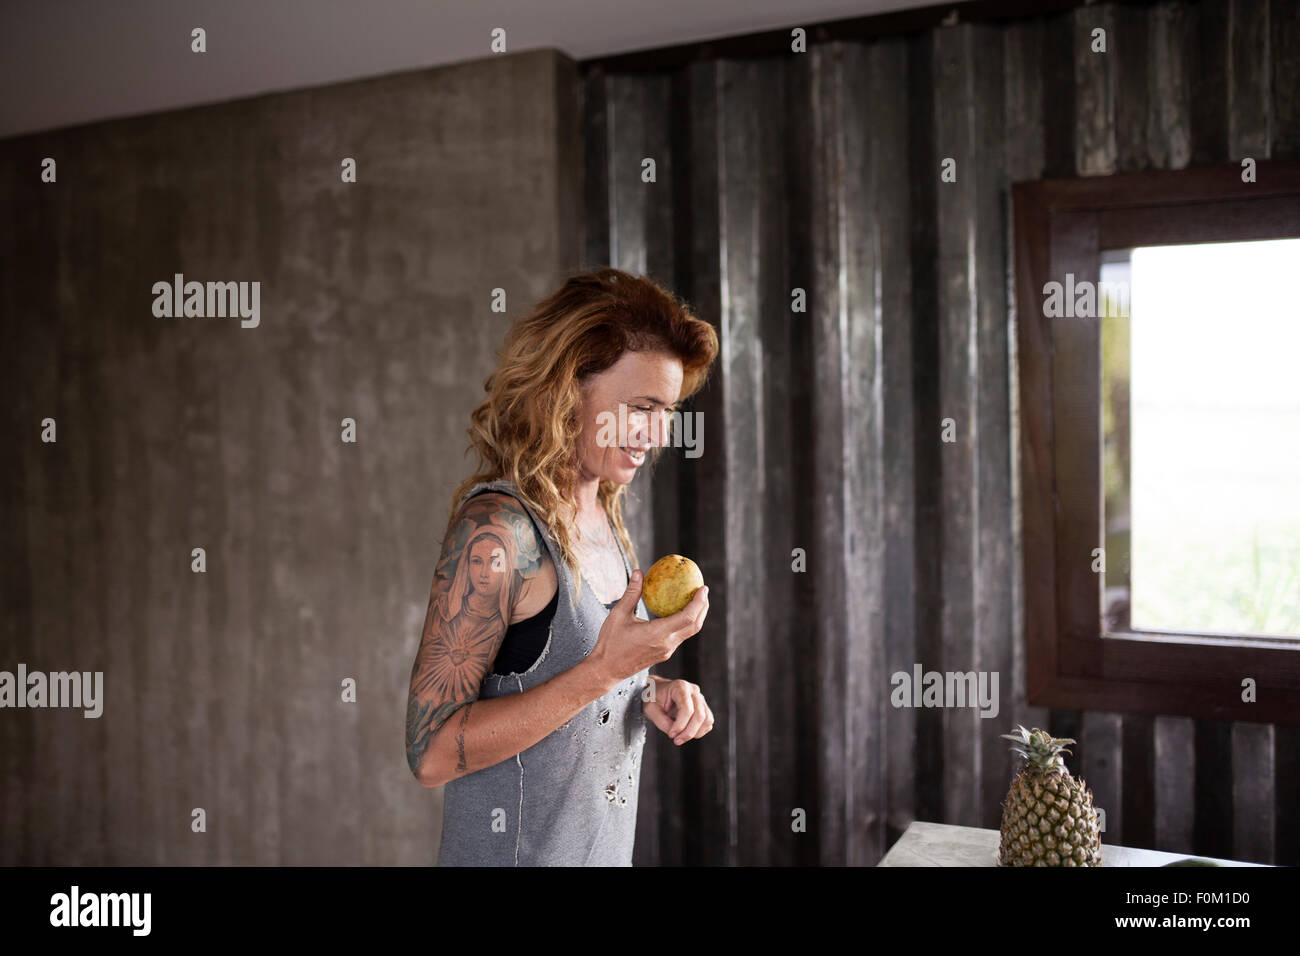 Martina Cerna, Woman with tattoos, Shipping container home, Bali expat Stock Photo